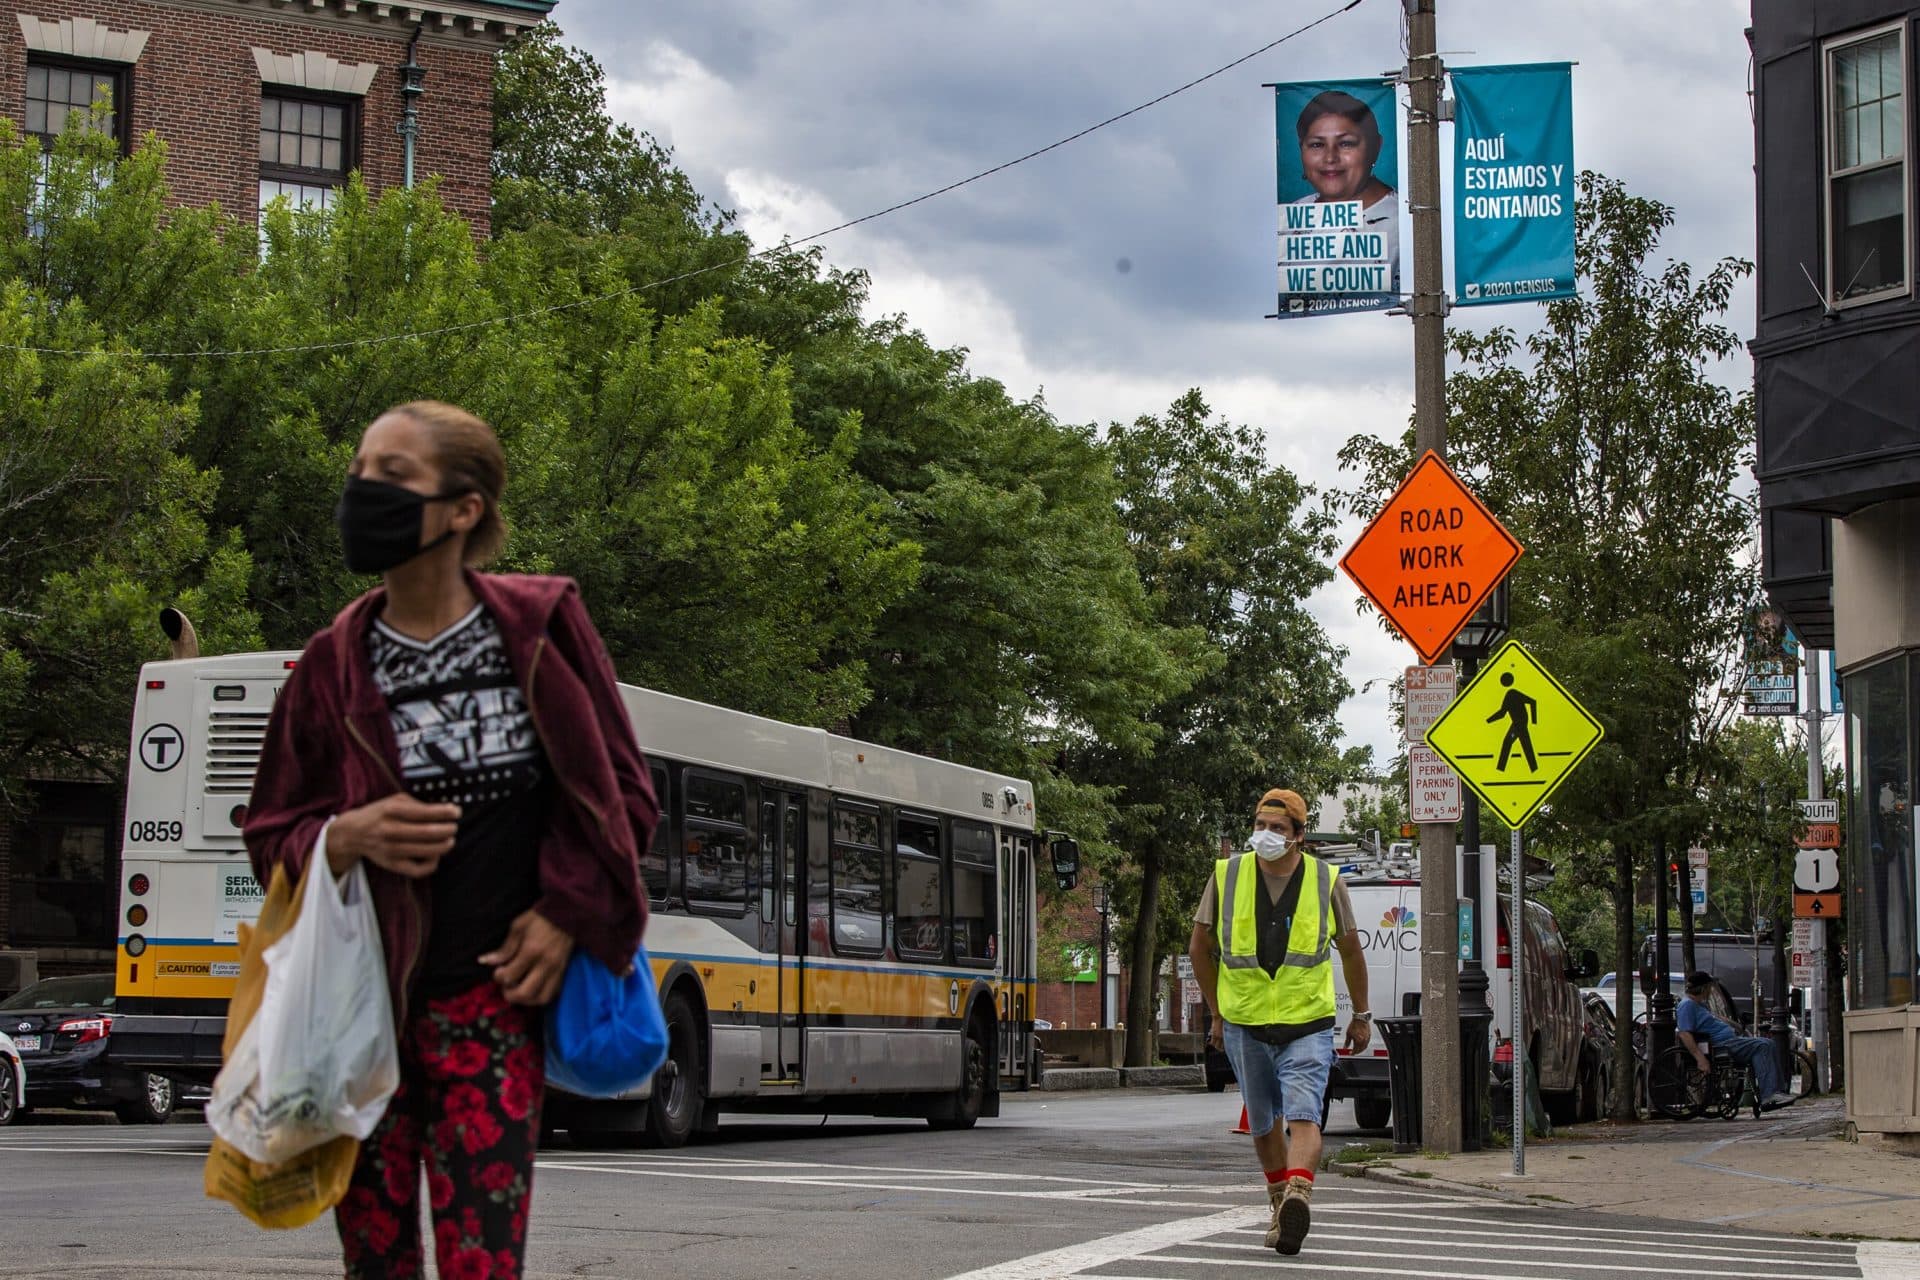 An August 2020 file photo showing trees around Bellingham Square in Chelsea. (Jesse Costa/WBUR)